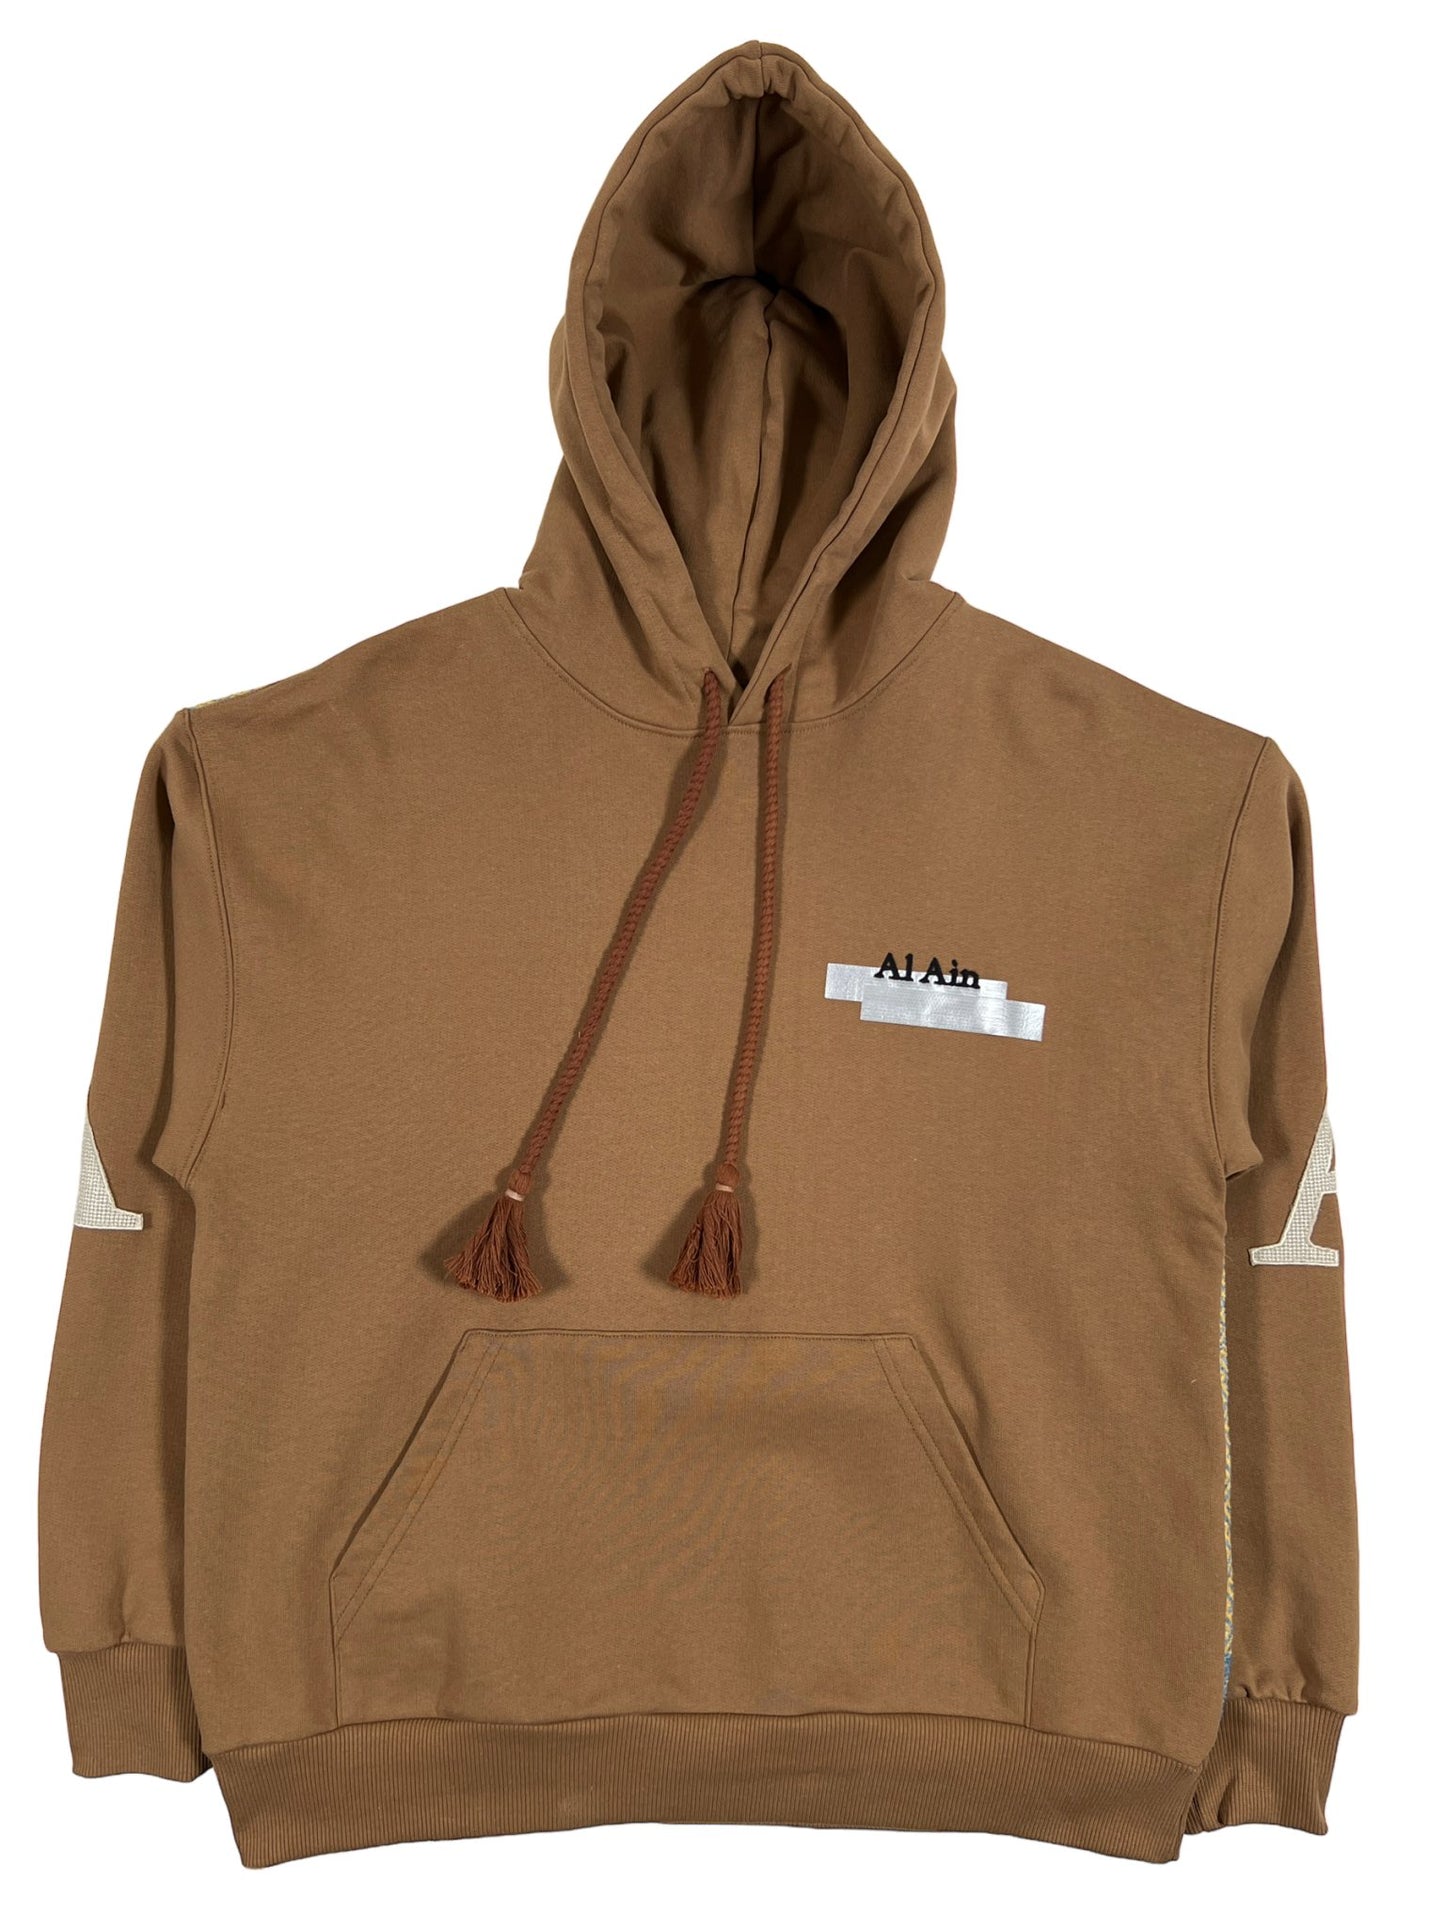 Brown AL AIN AHOX S102 PALMIER CHAMEAU hoodie with a front pocket and decorative tassels on the thick rope texture lace.